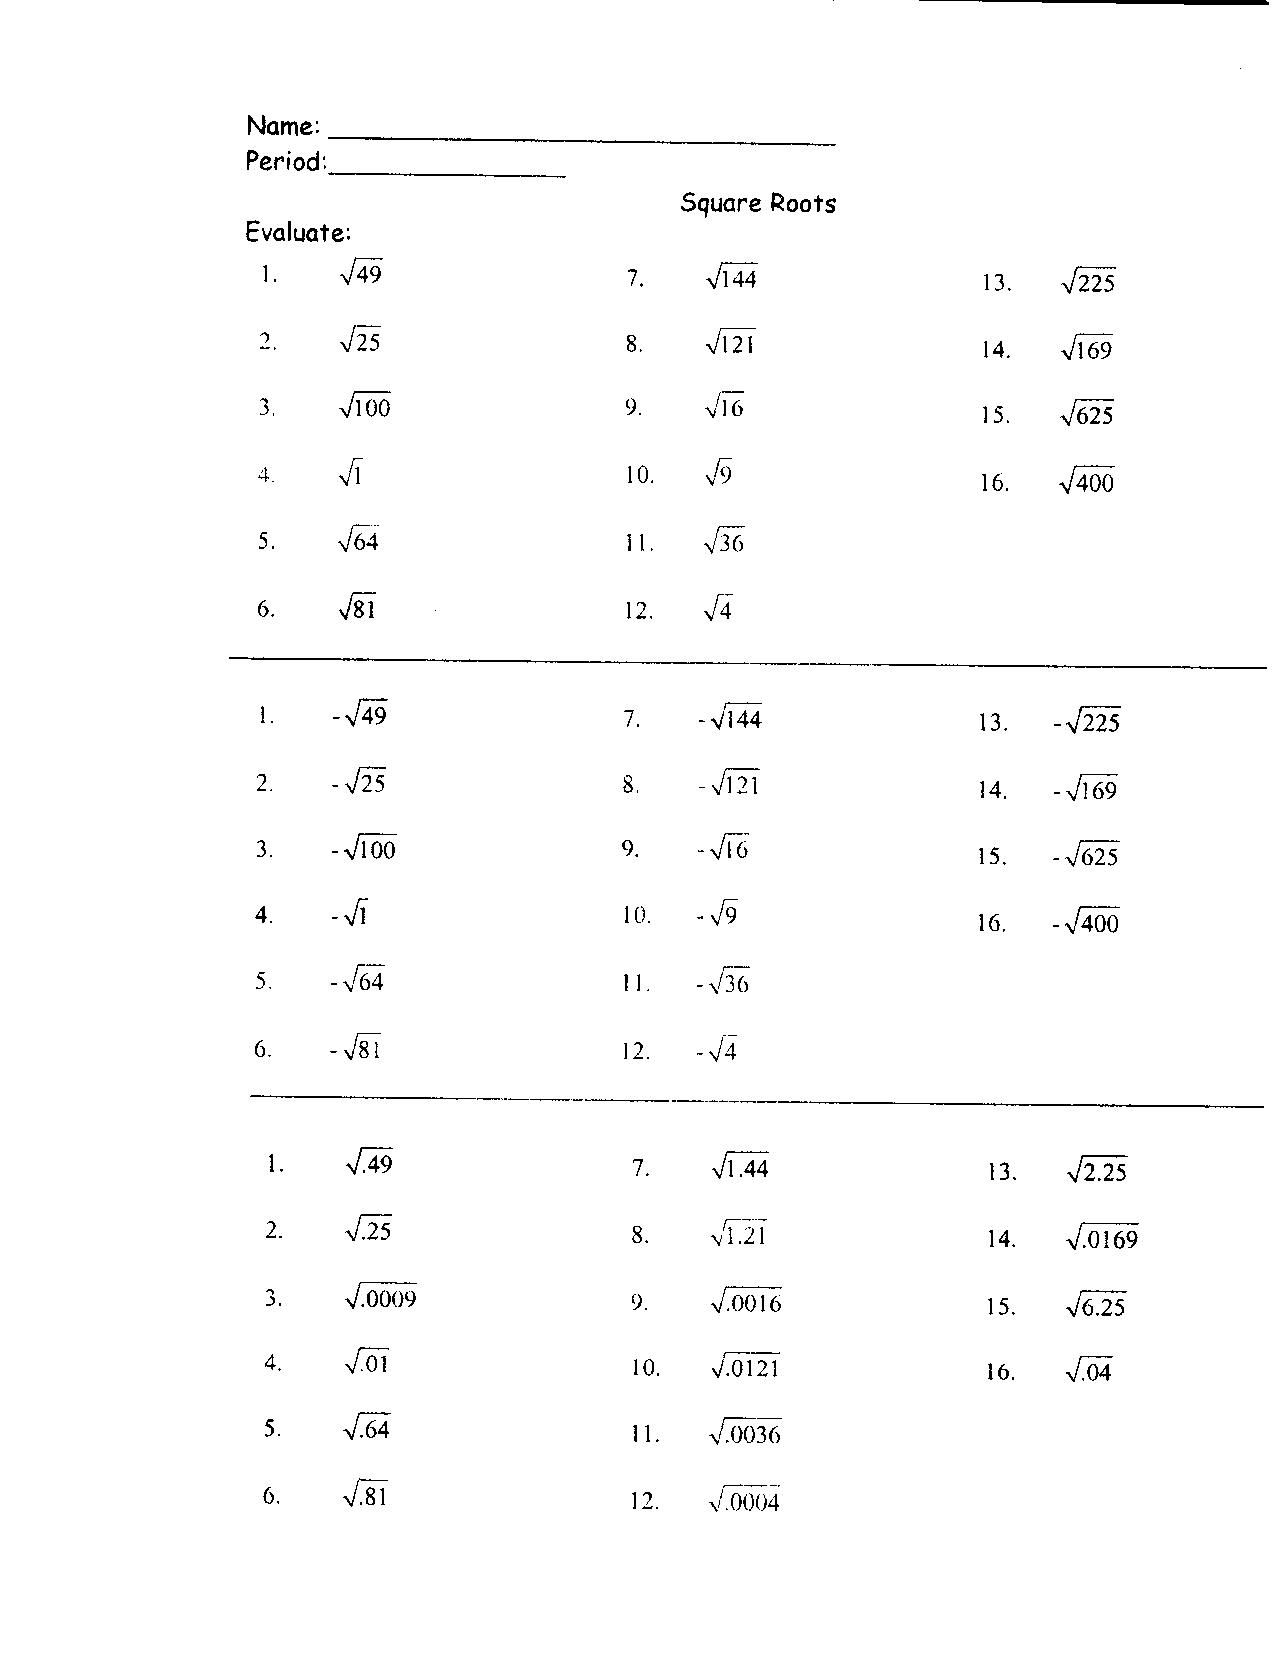 square-numbers-roots-worksheet-by-casey1318-teaching-resources-tes